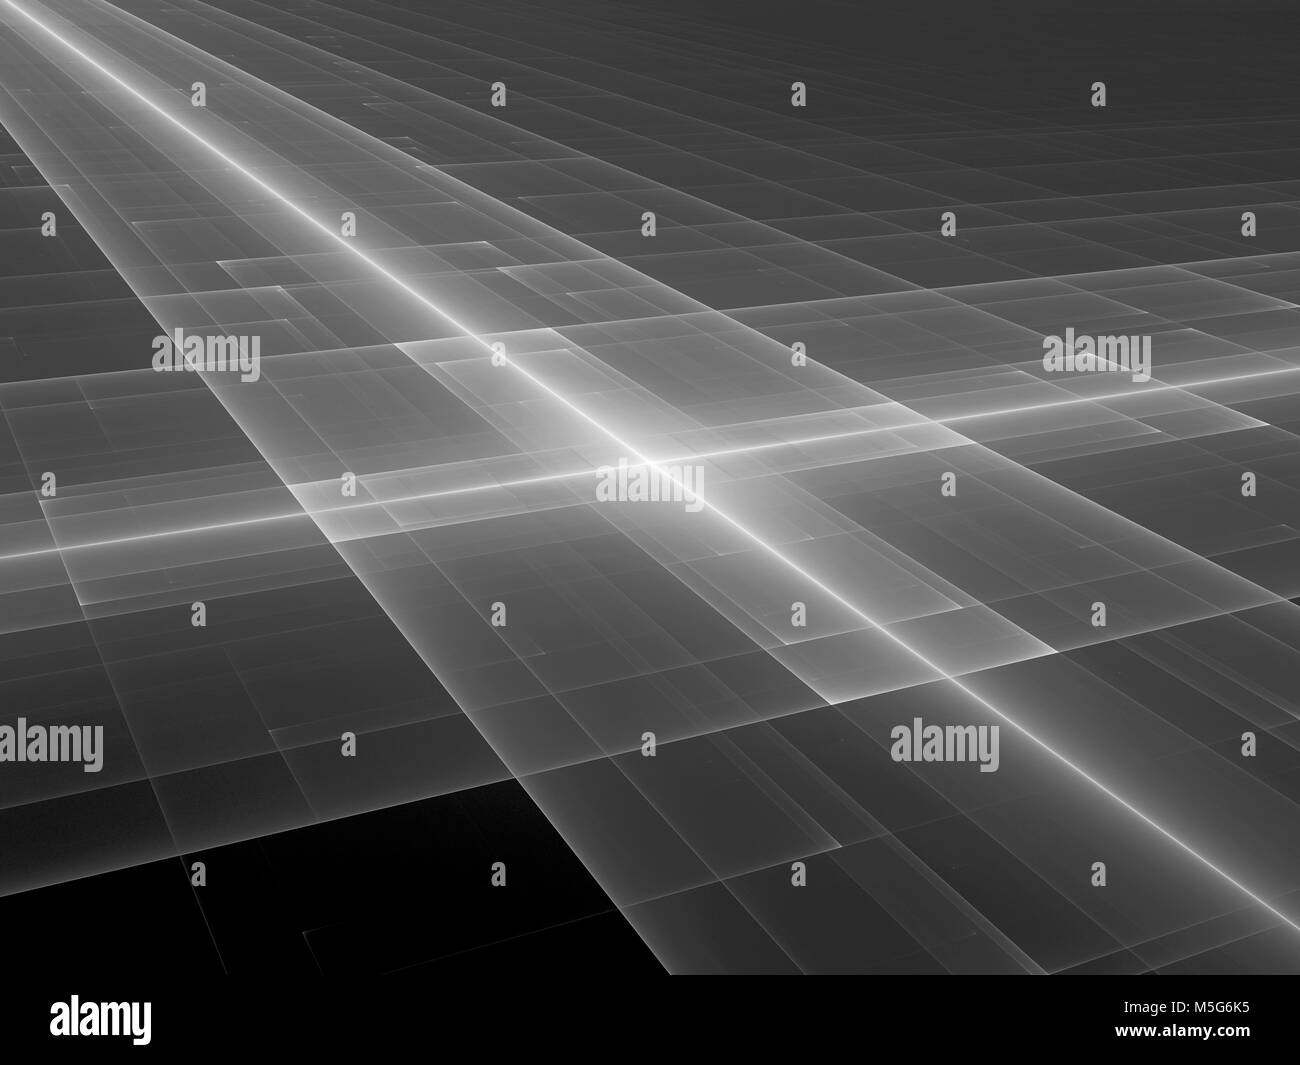 Glowing futuristic texture, black and white, computer generated abstract texture for overlay or screen effect, 3D rendering Stock Photo